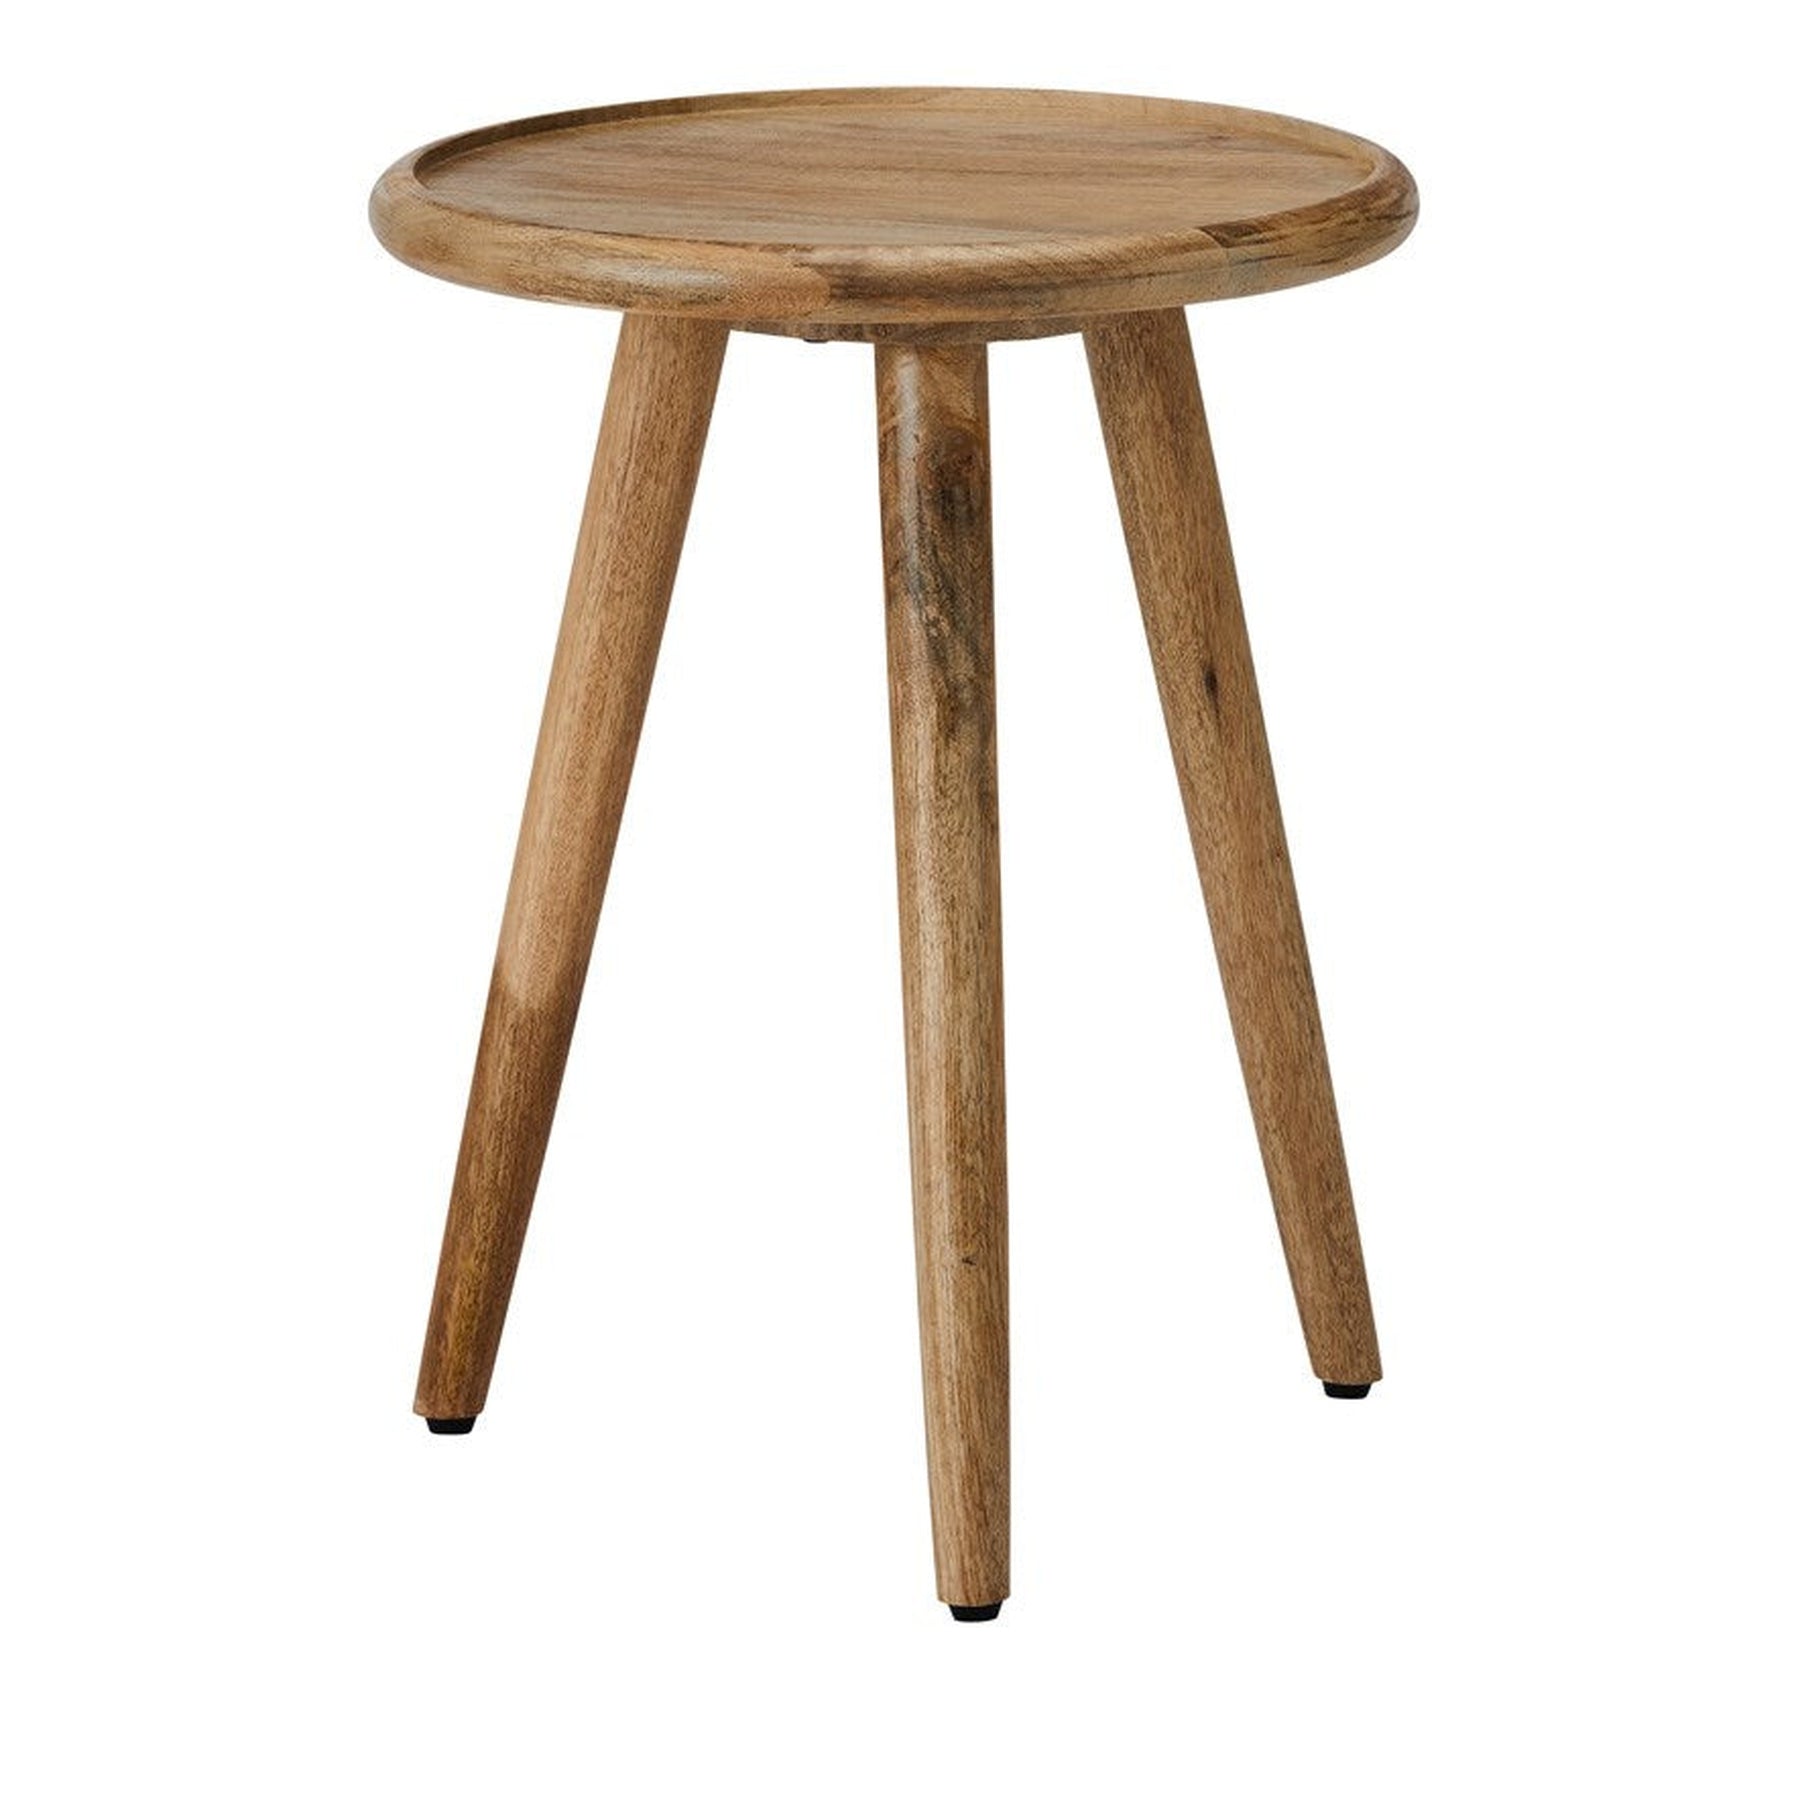 Retro Round Small Solid Wood Side Table | 16x16x20 inches